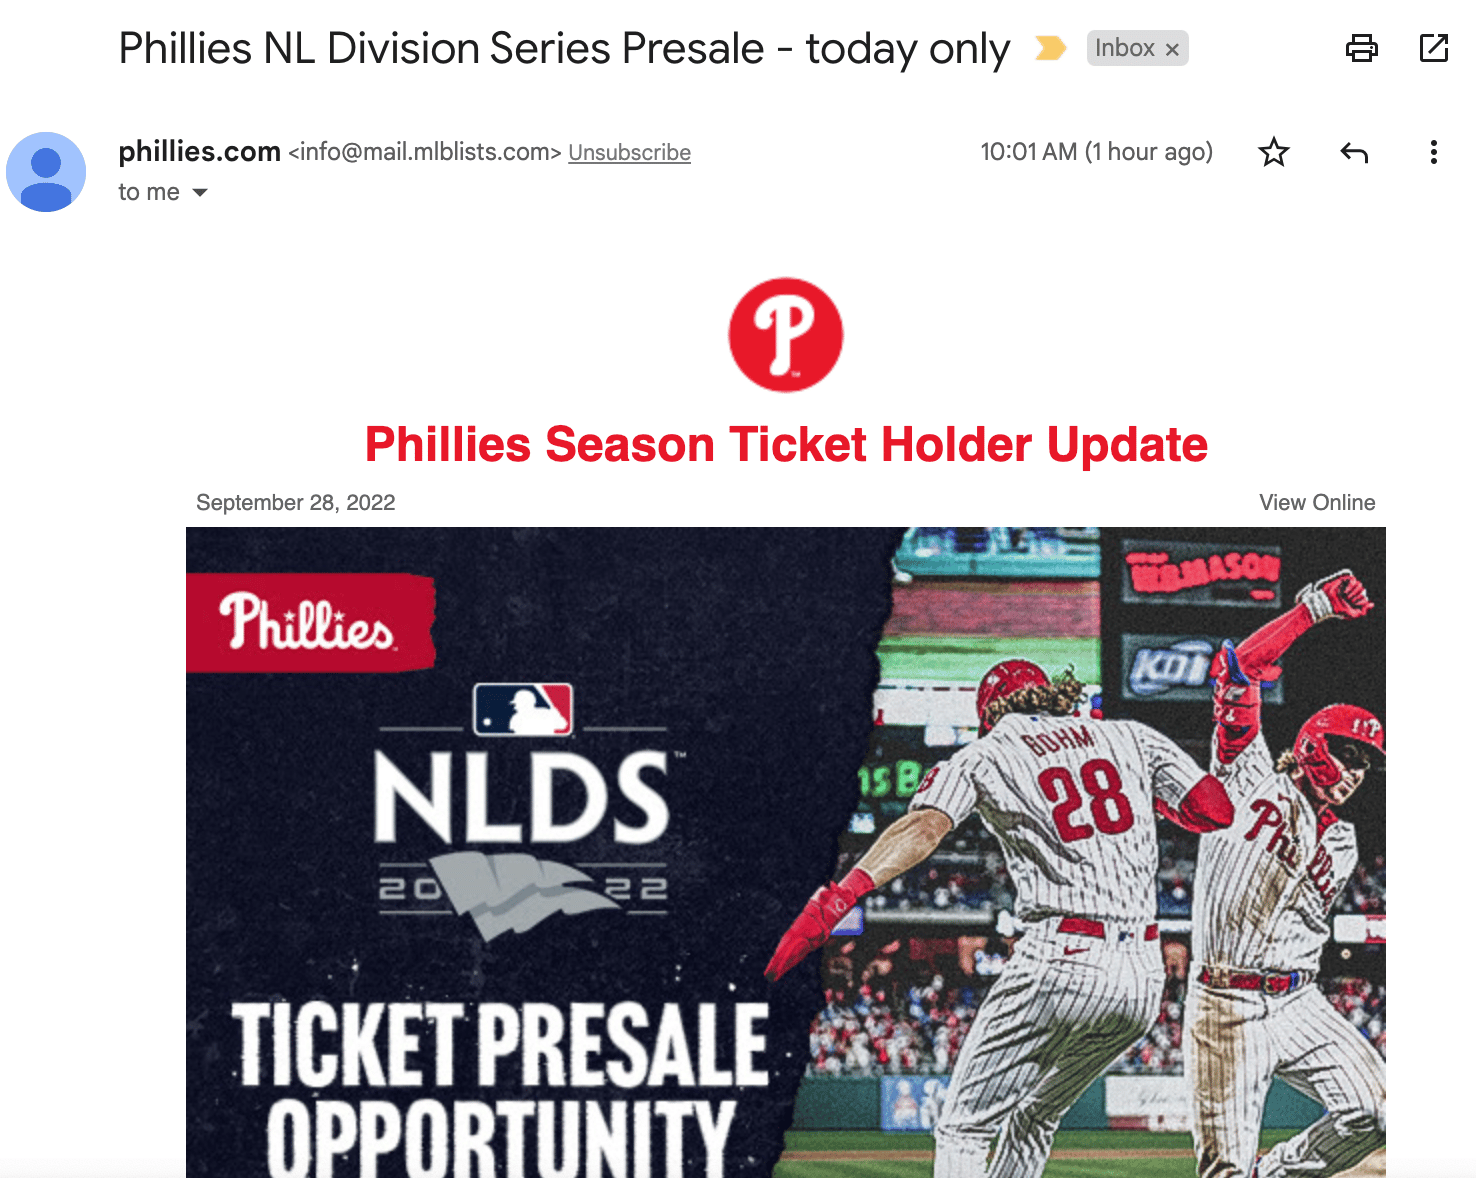 Phillies Send Out NLDS Ticket Pre-Sale Email After Losing to Cubs